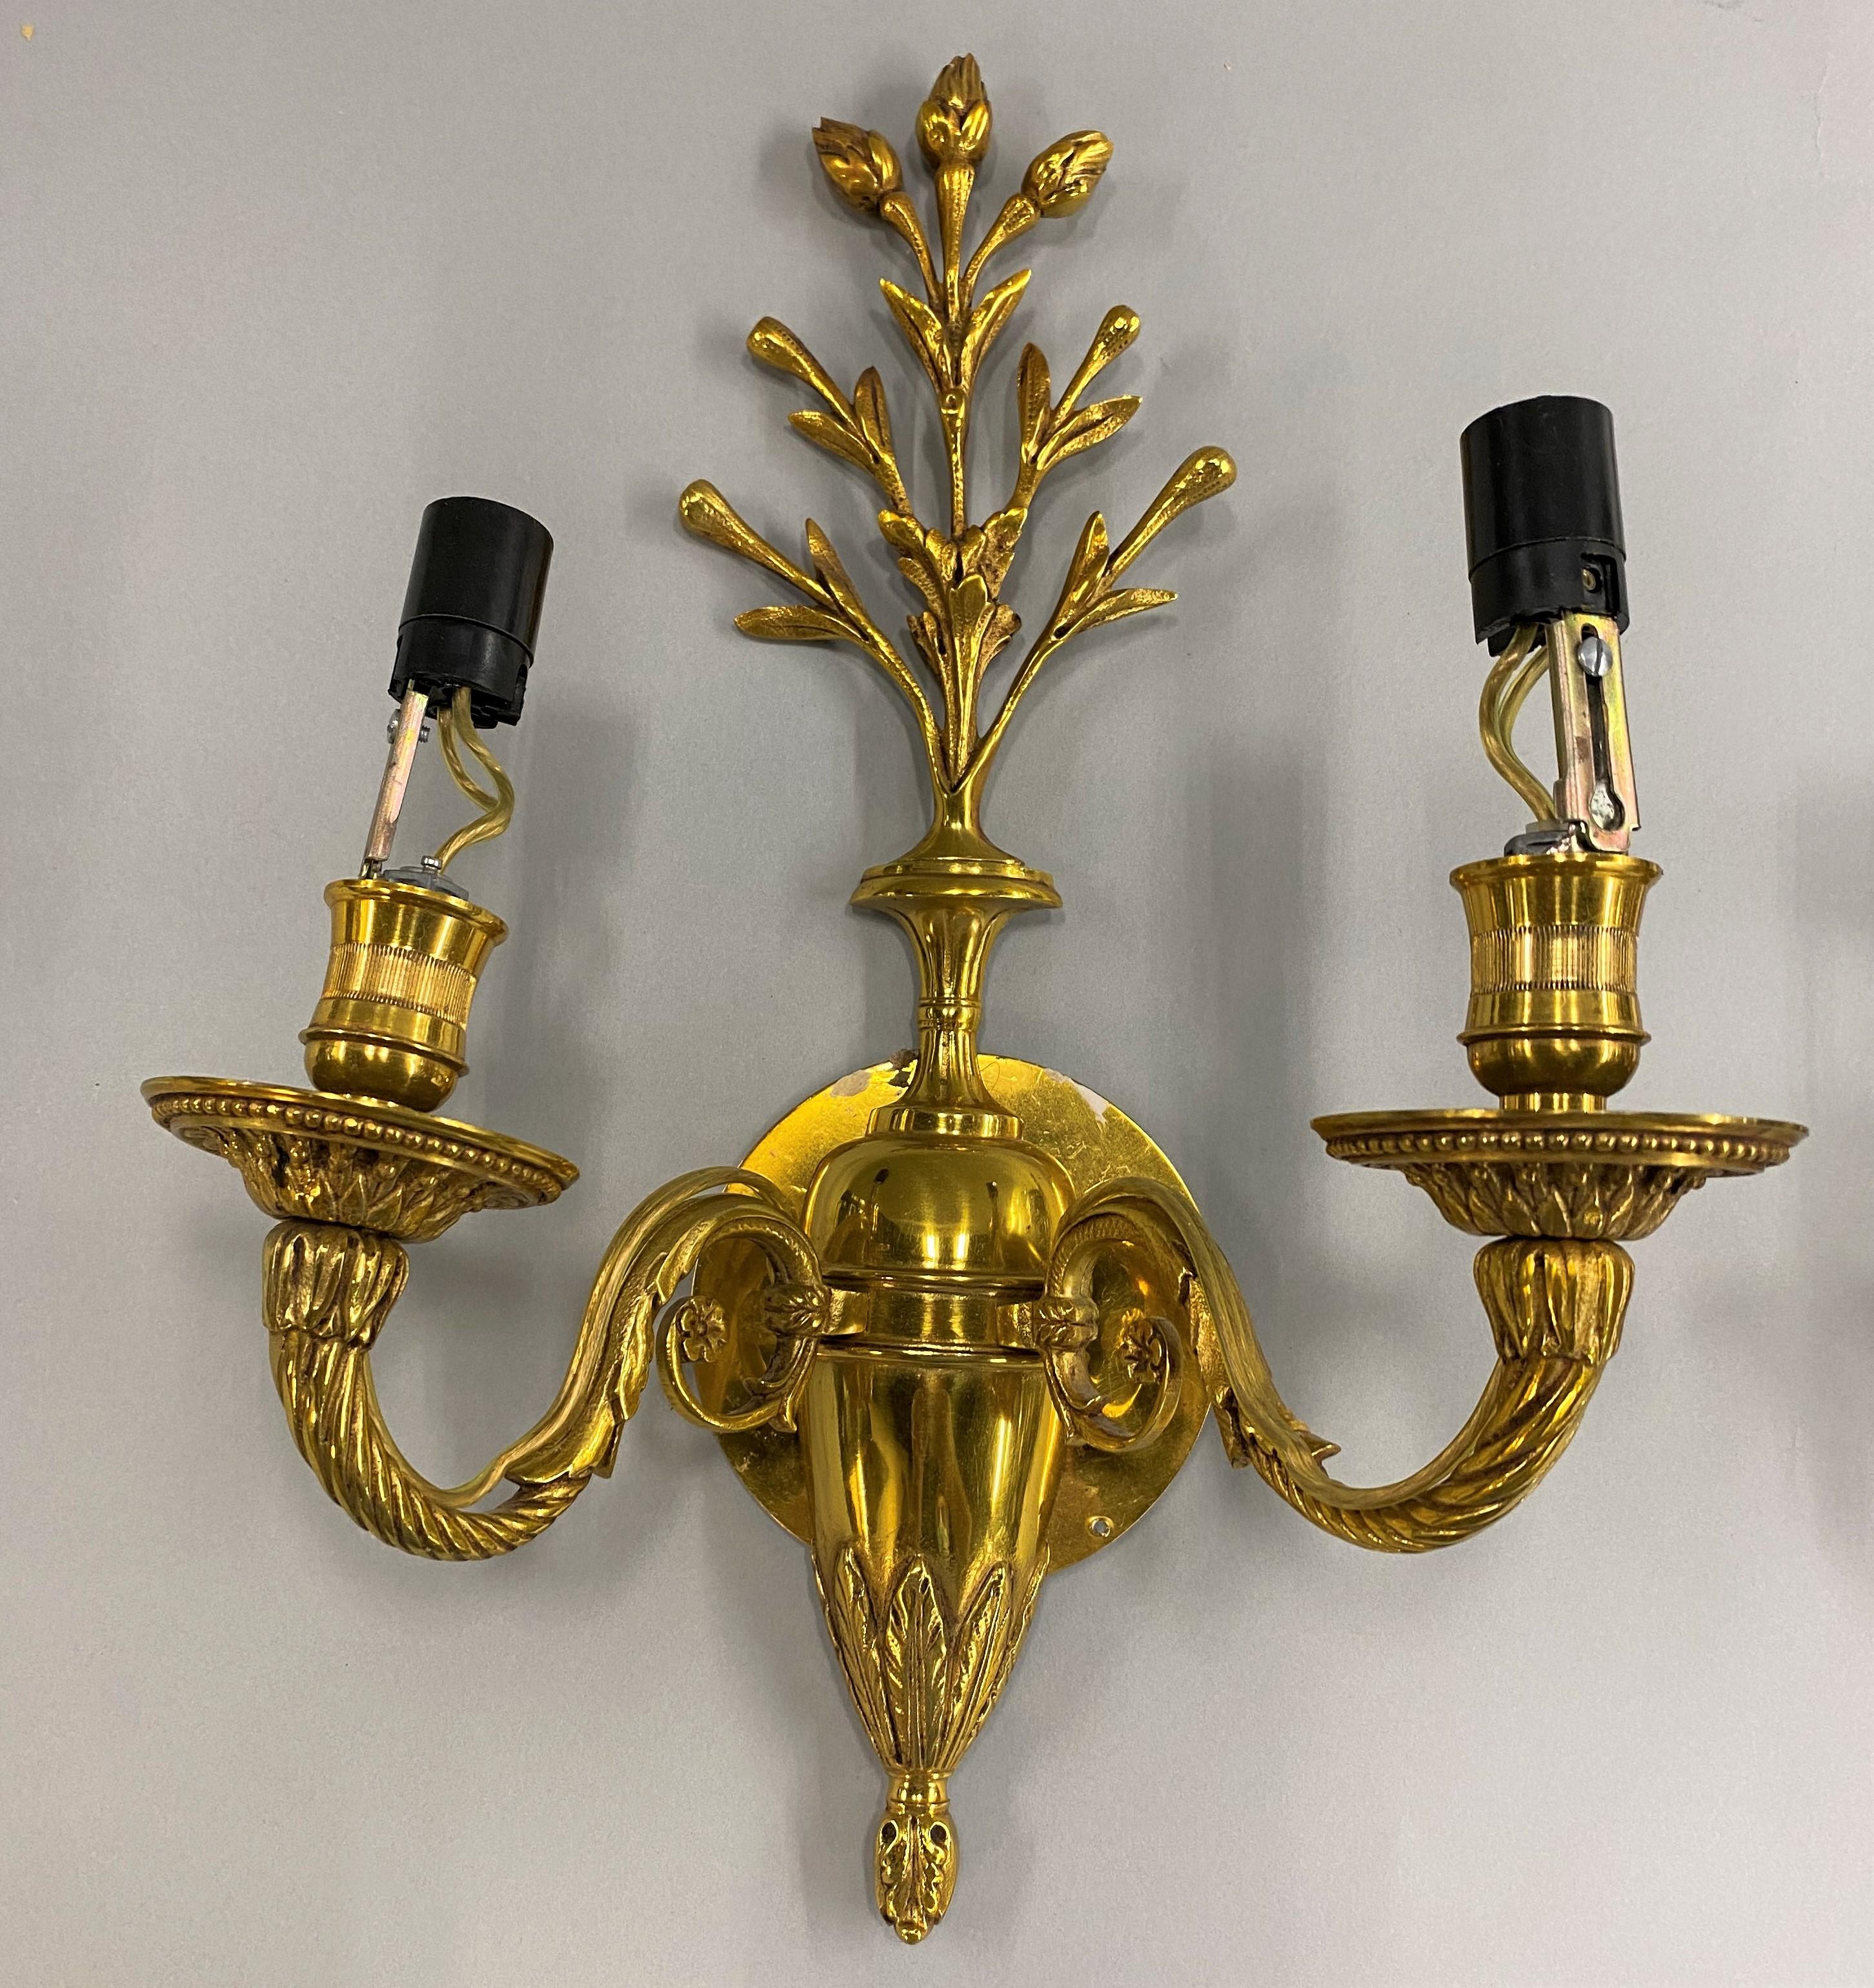 A fine pair of brass two-light sconces with foliate crests and fine detailed scrollwork, unsigned, attributed to Maison Charles. Founded in 1908 by Ernest Charles, Maison Charles is one of the oldest family owned French lighting companies still in